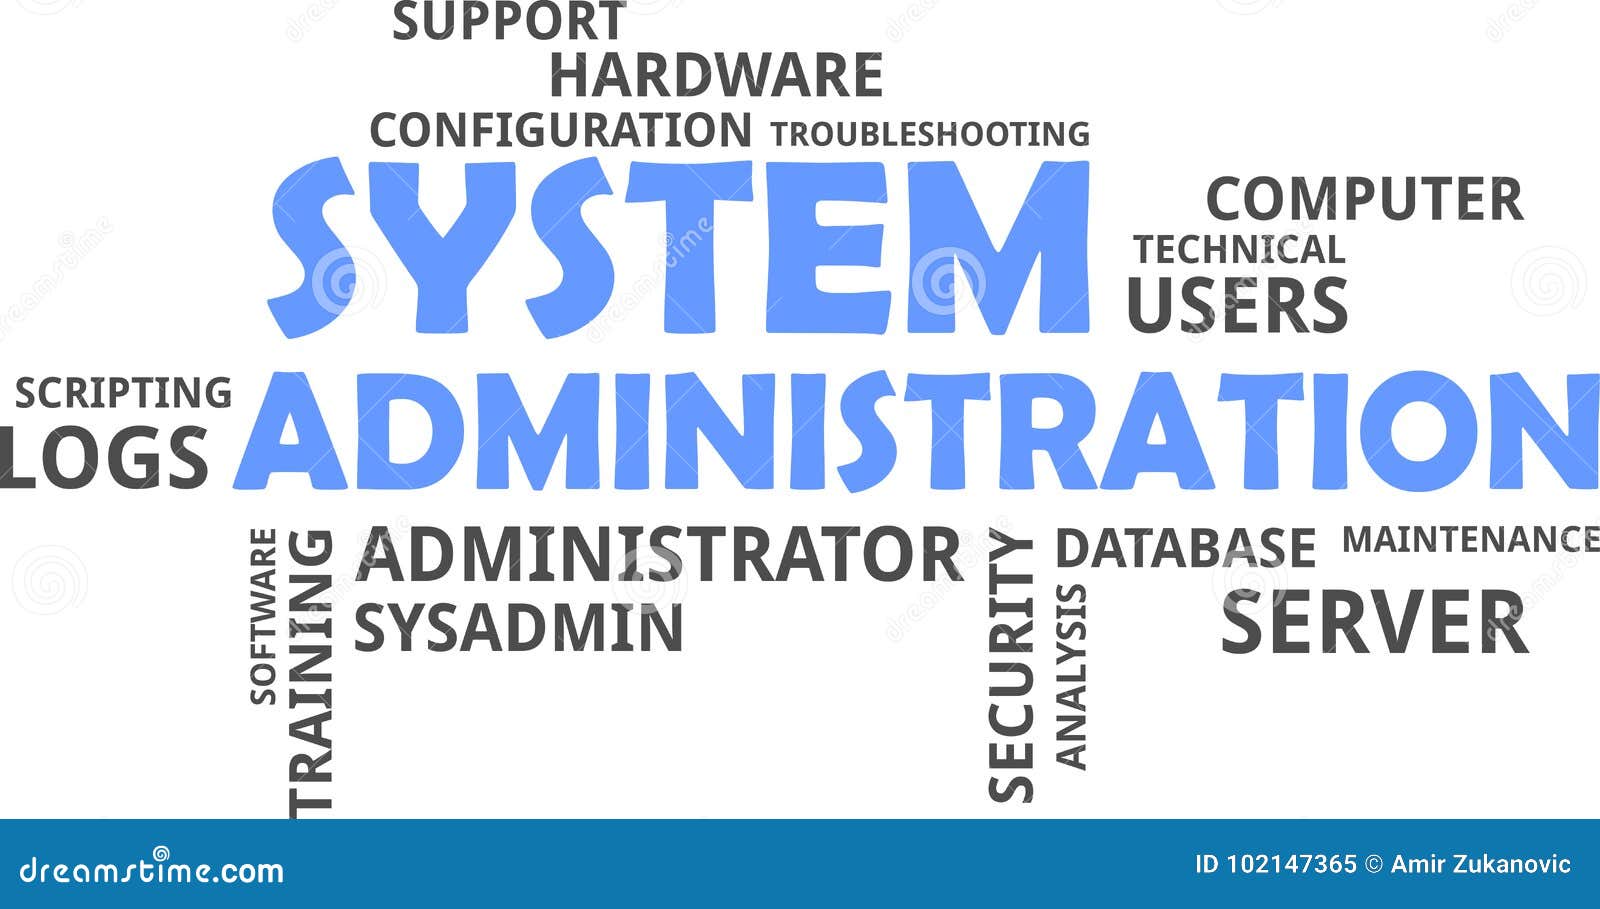 word cloud - system administration